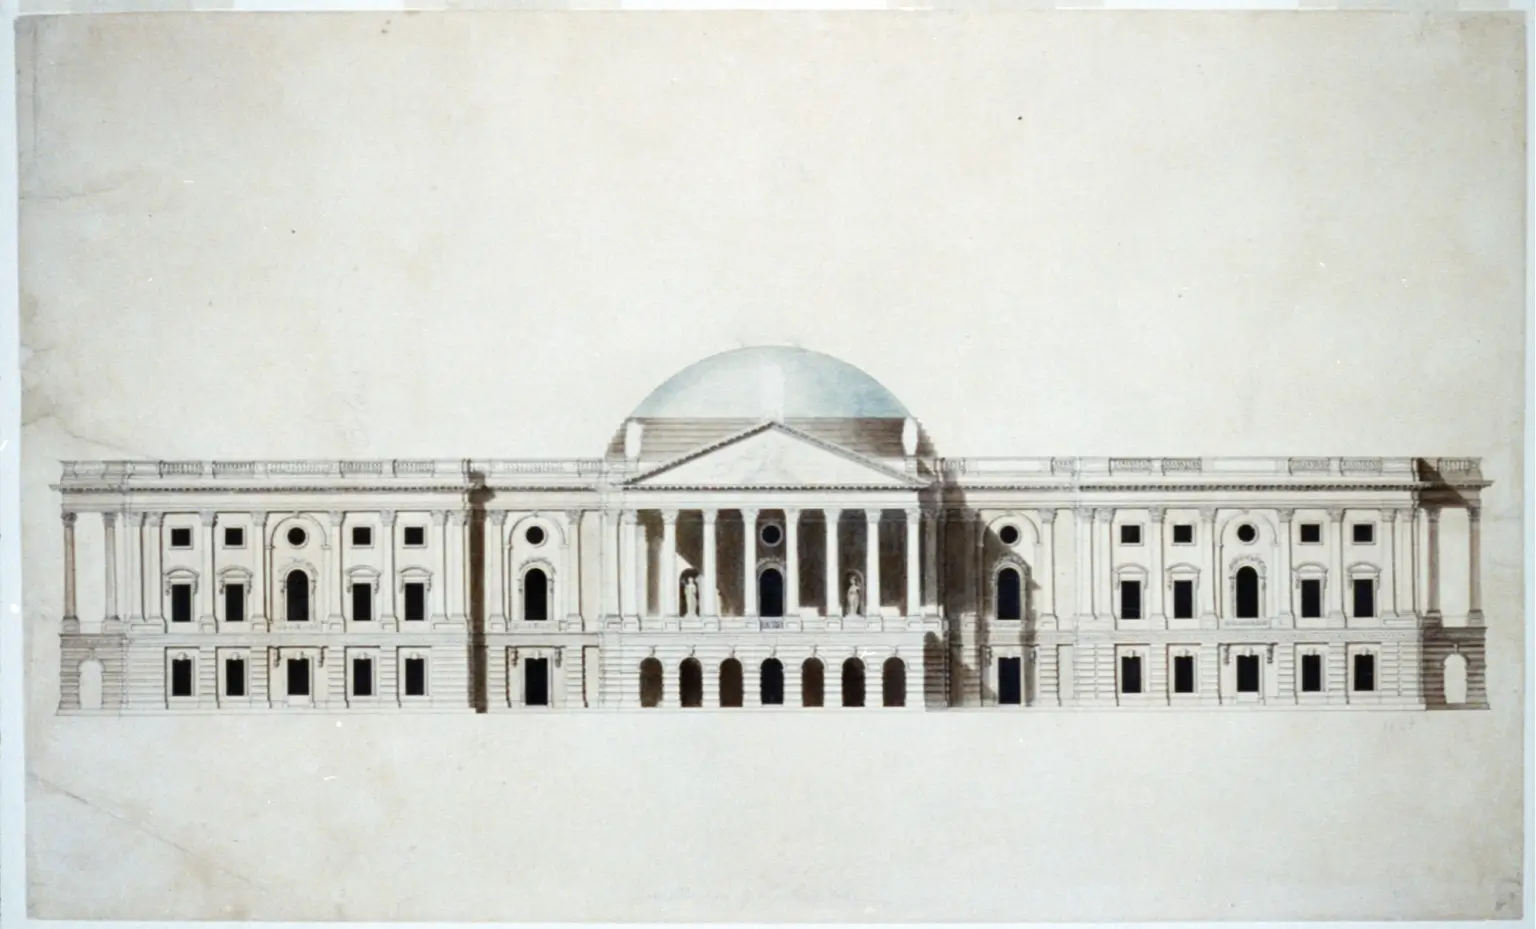 Initial 1700 drawing and design of The Capitol